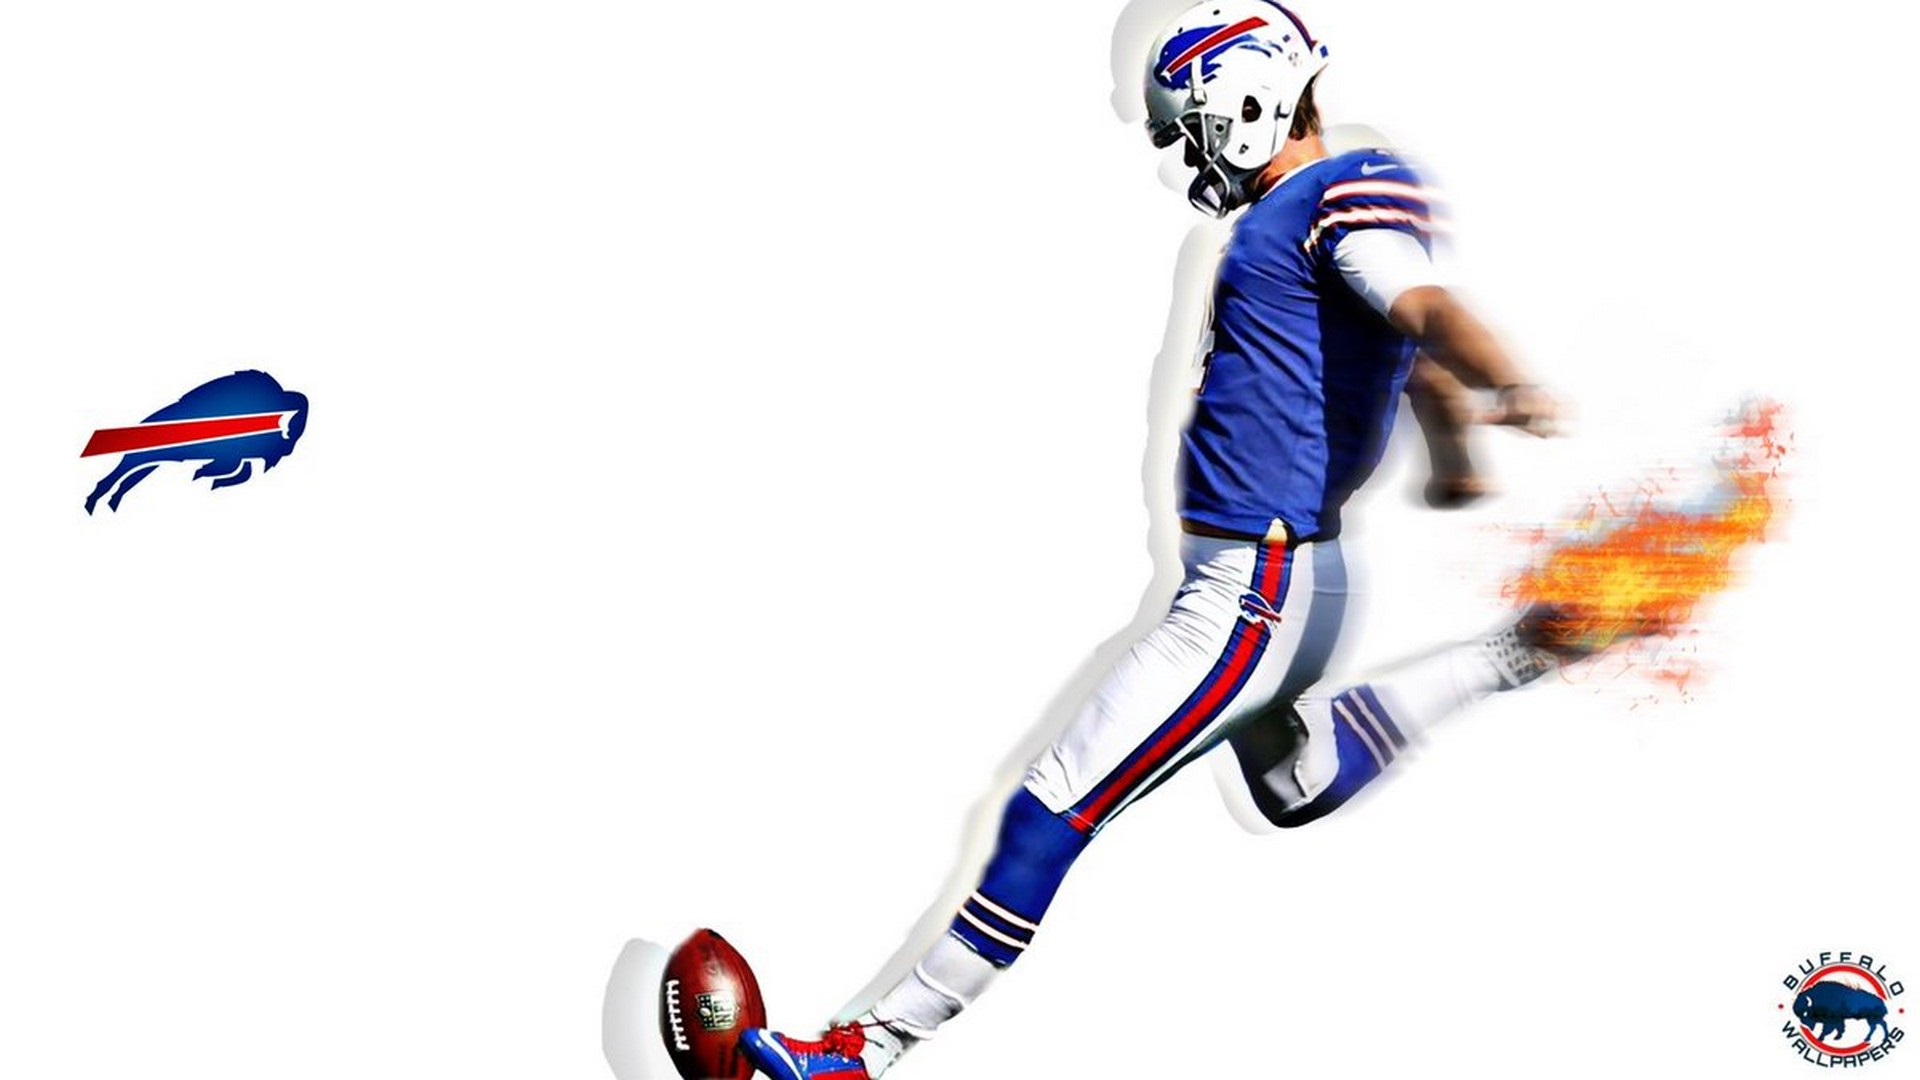 Buffalo Bills NFL Desktop Wallpaper with high-resolution 1920x1080 pixel. You can use this wallpaper for your Mac or Windows Desktop Background, iPhone, Android or Tablet and another Smartphone device